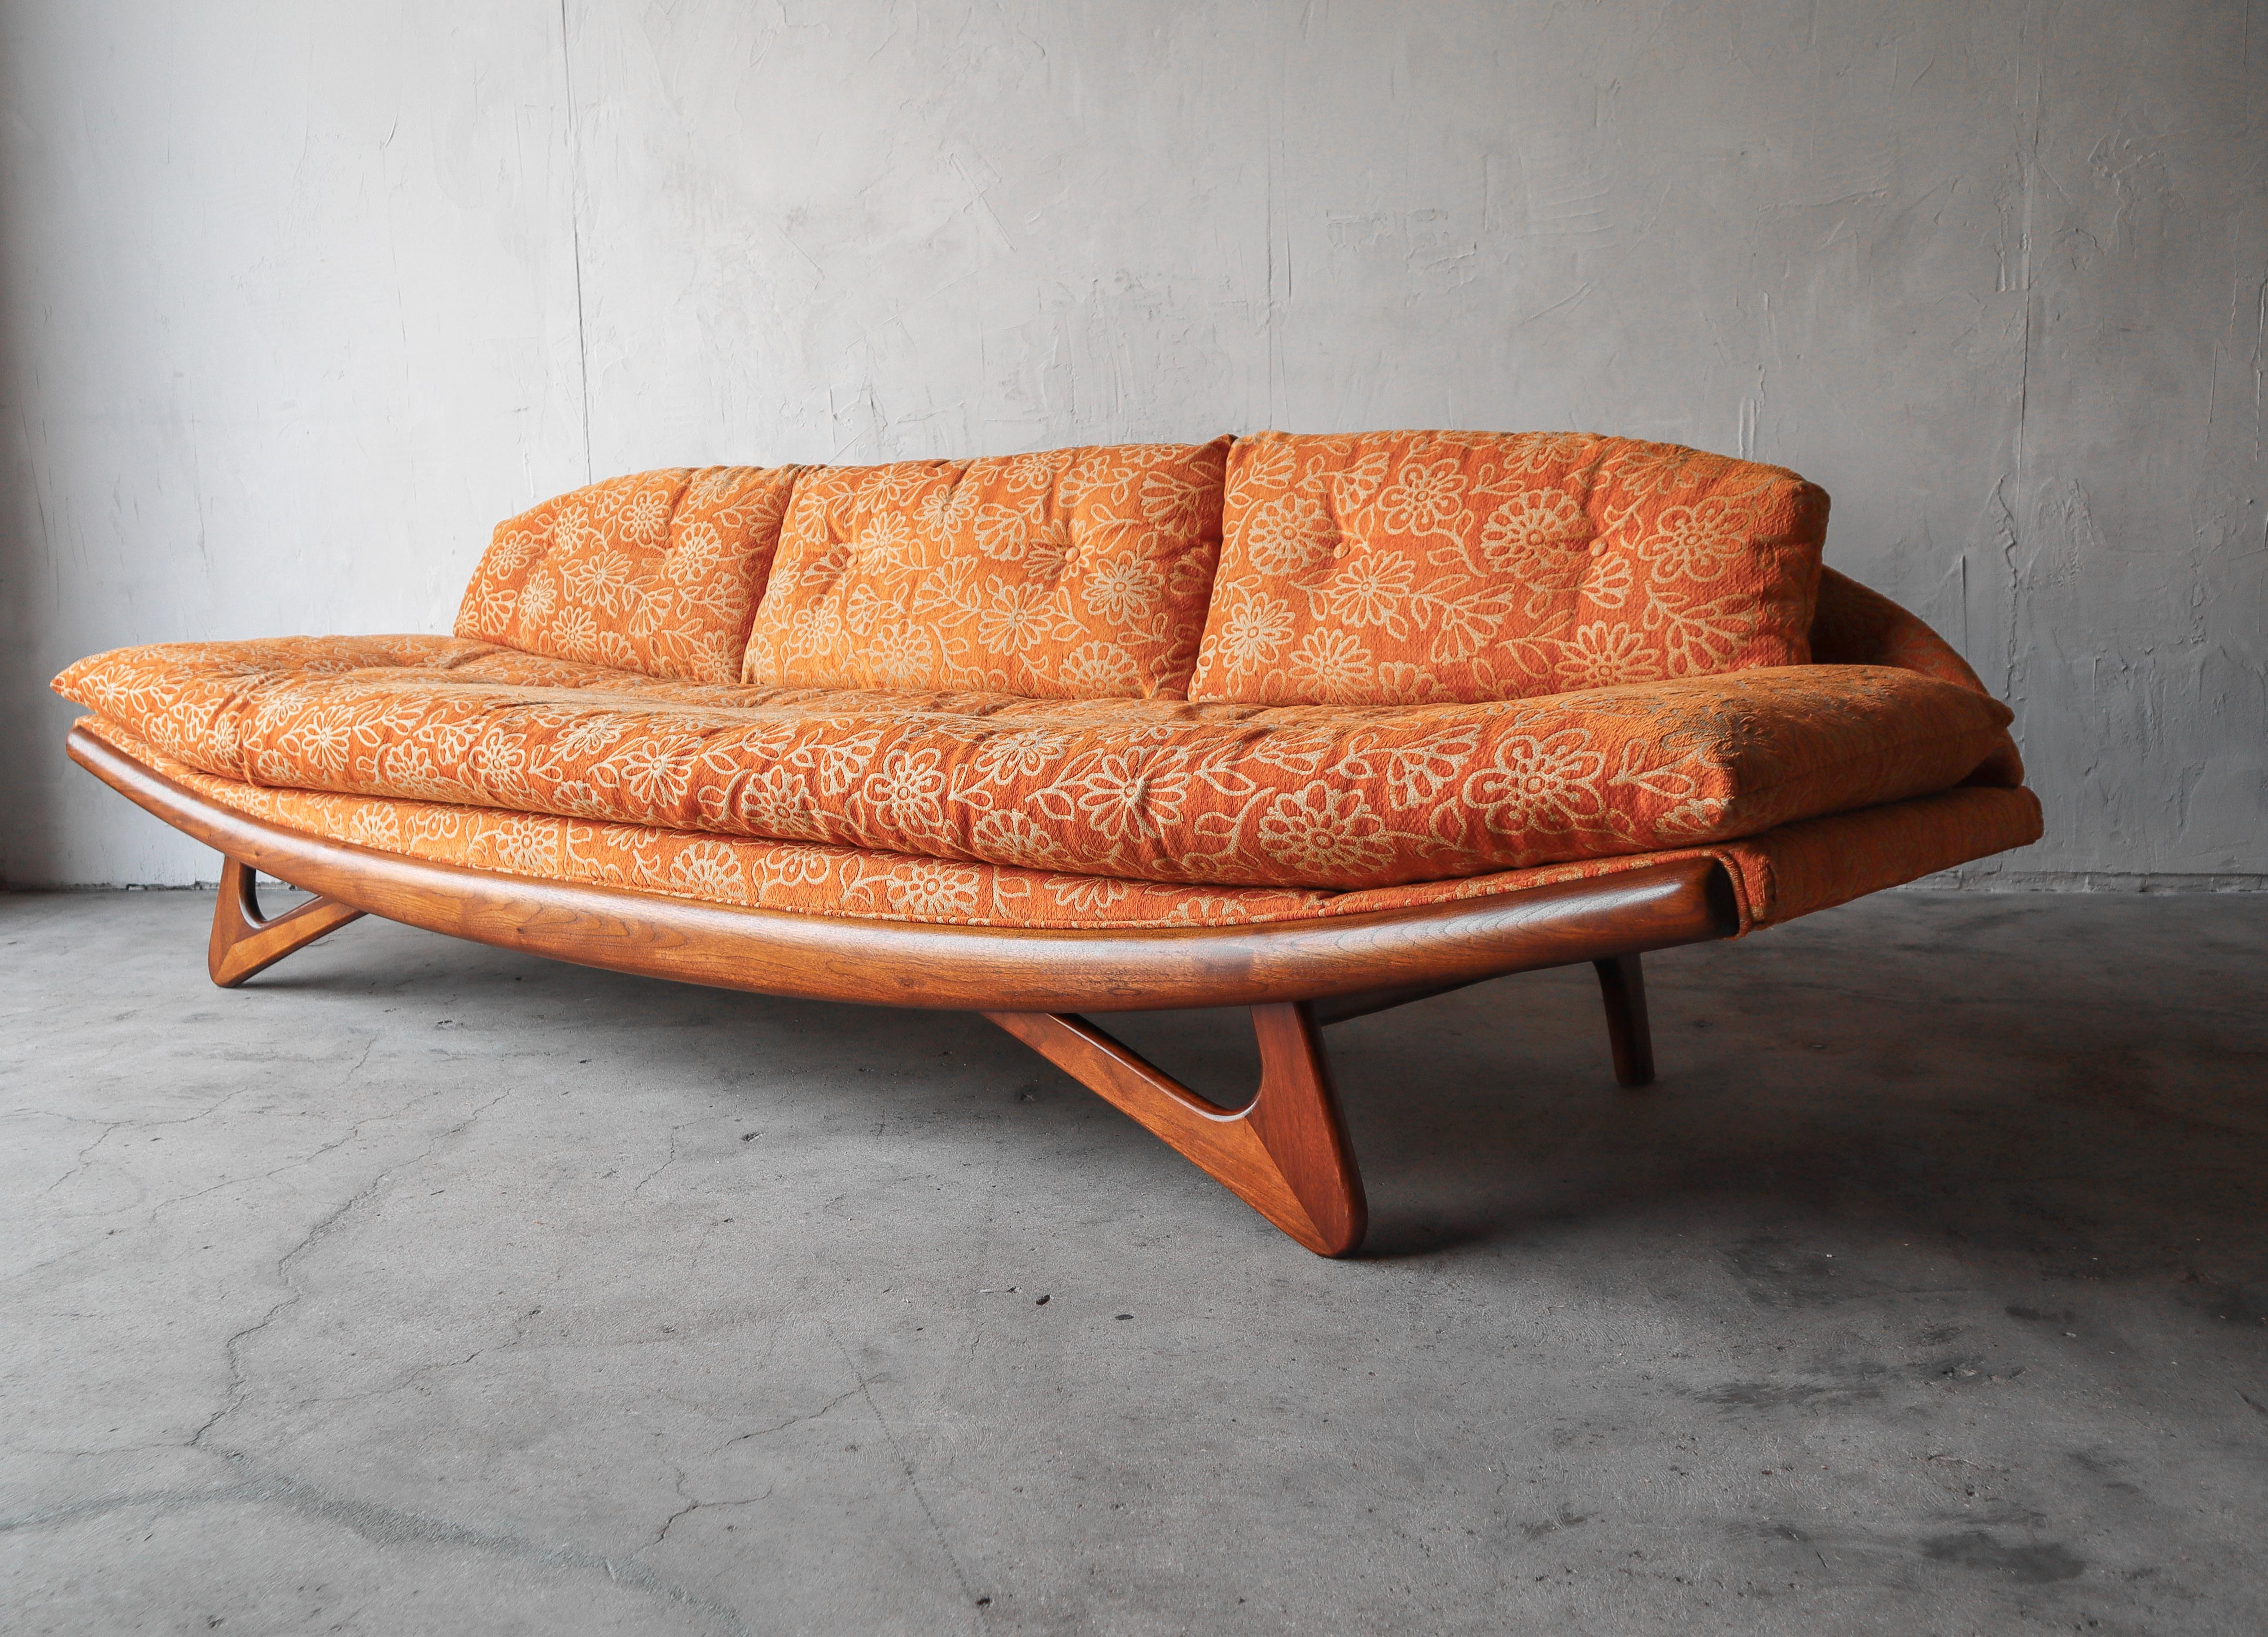 Original mid century gondola sofa by Adrian Pearsall.

Sofa is being sold as found. The walnut base is in excellent condition and the frame is solid. The fabric looks ok on a whole but has seen better days, reupholstery needed.